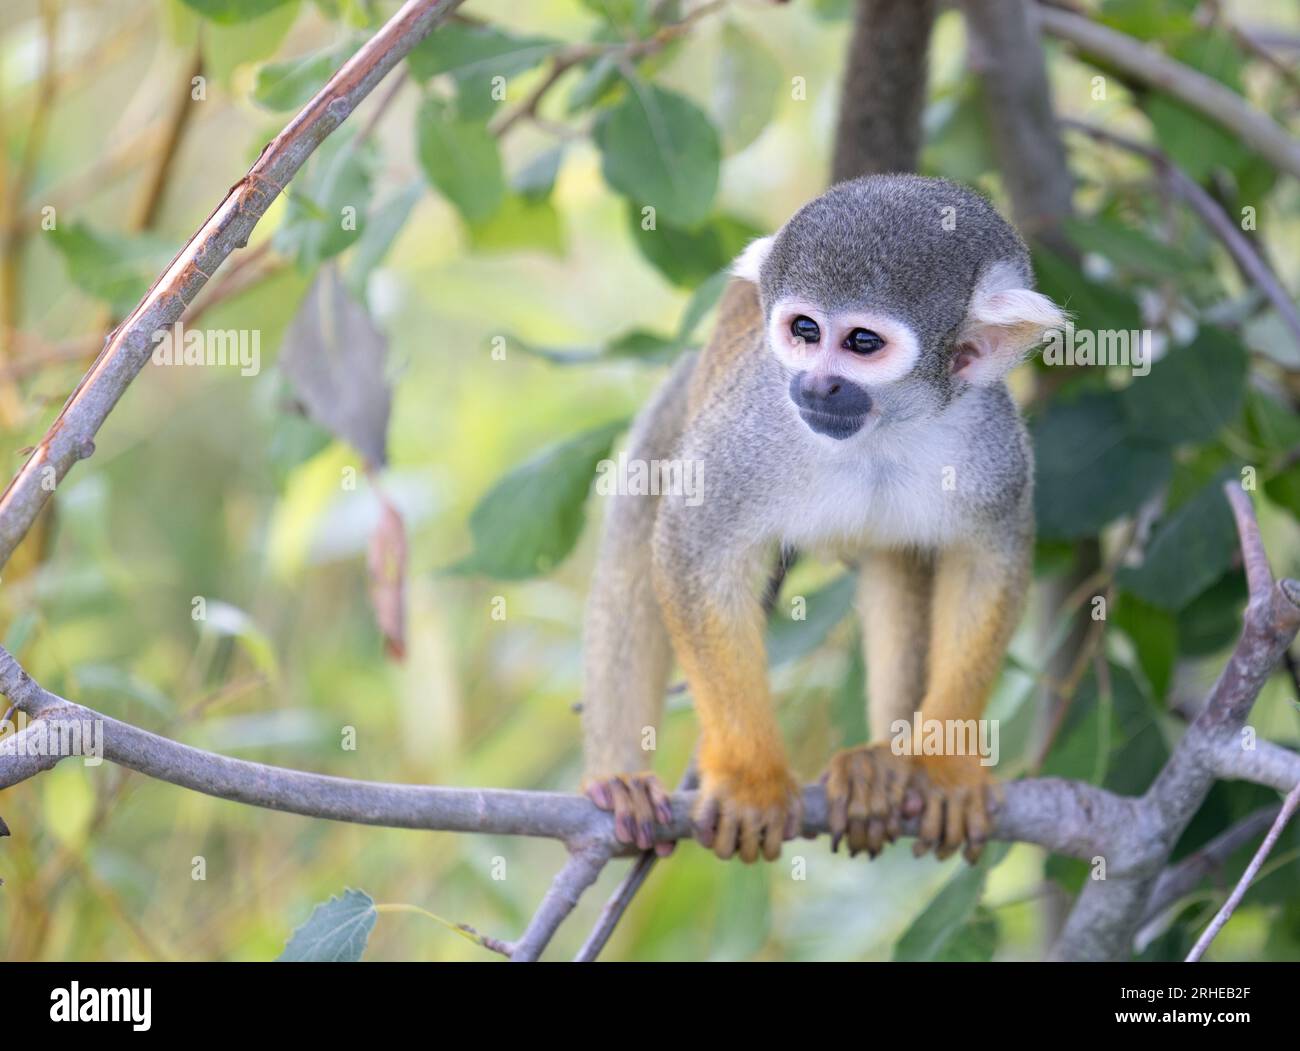 Common Squirrel Monkey, Simia sciurea, from Central and South America - New World Monkey; One adult, front view Stock Photo